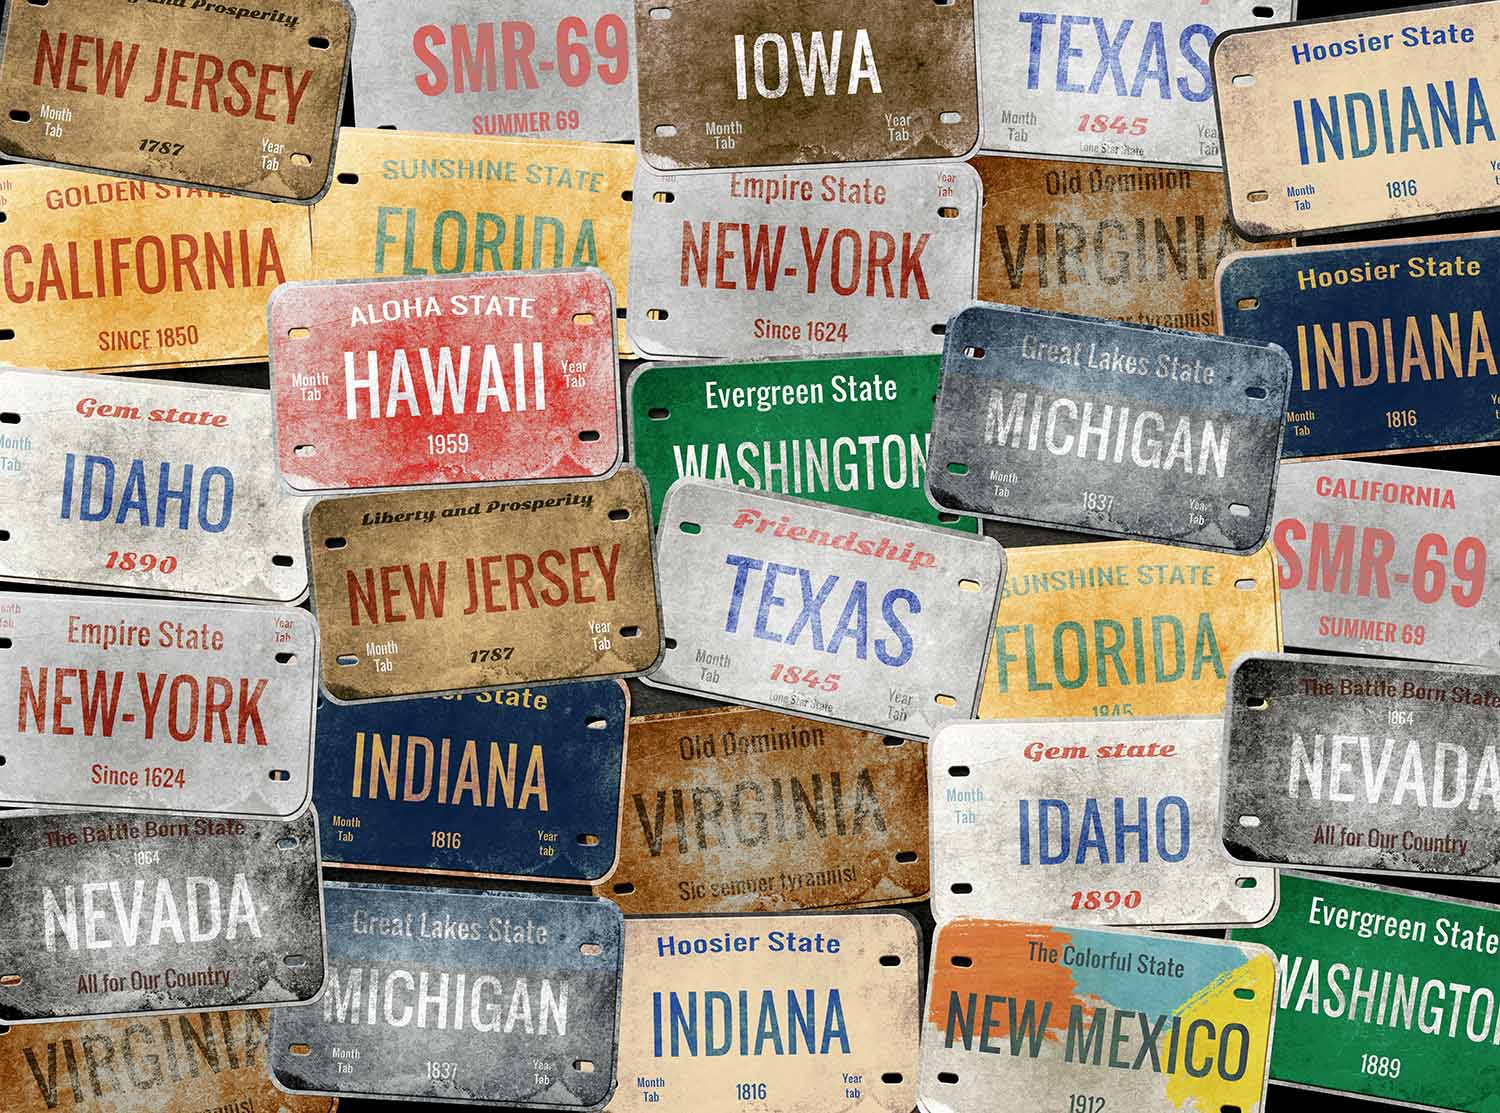 License plates spread out